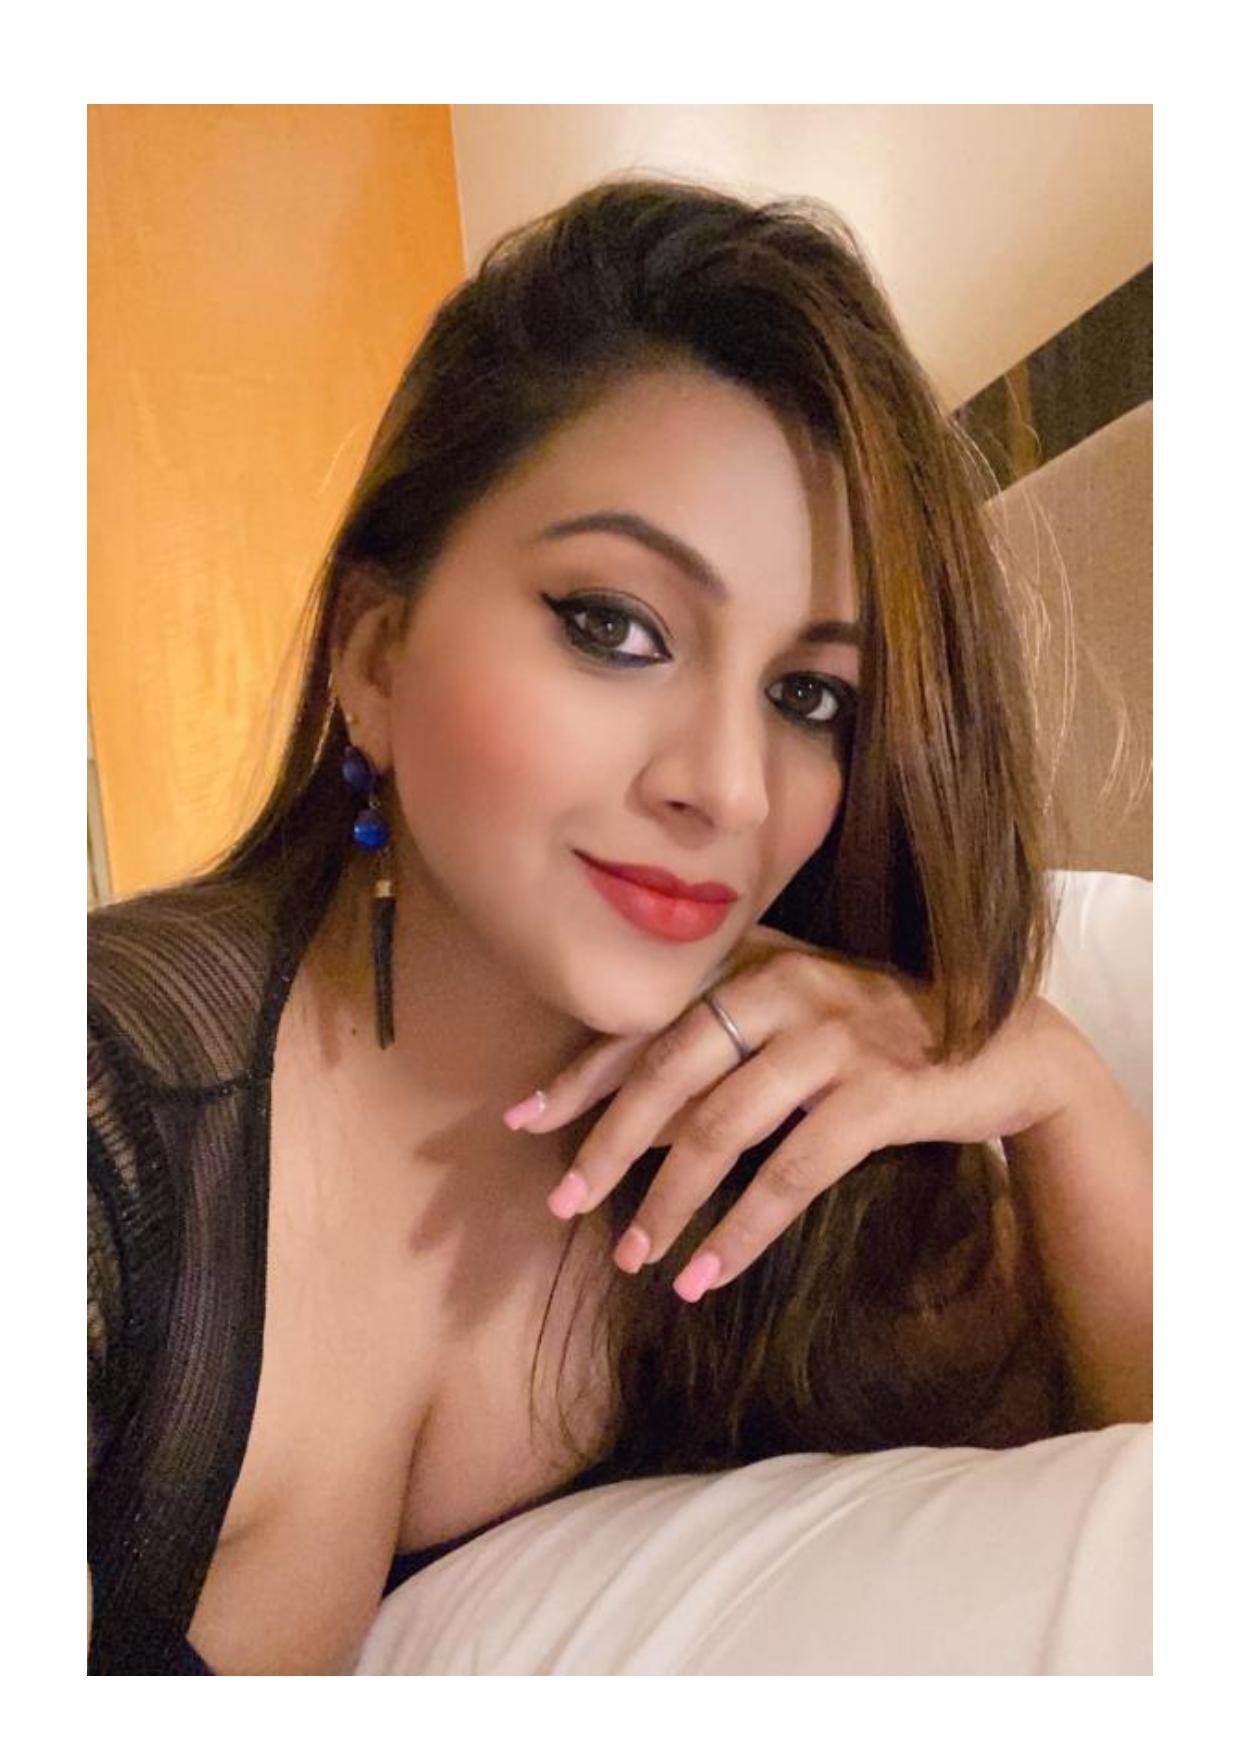 Punjabi call girls in greater Allahabad 100% real and genuine